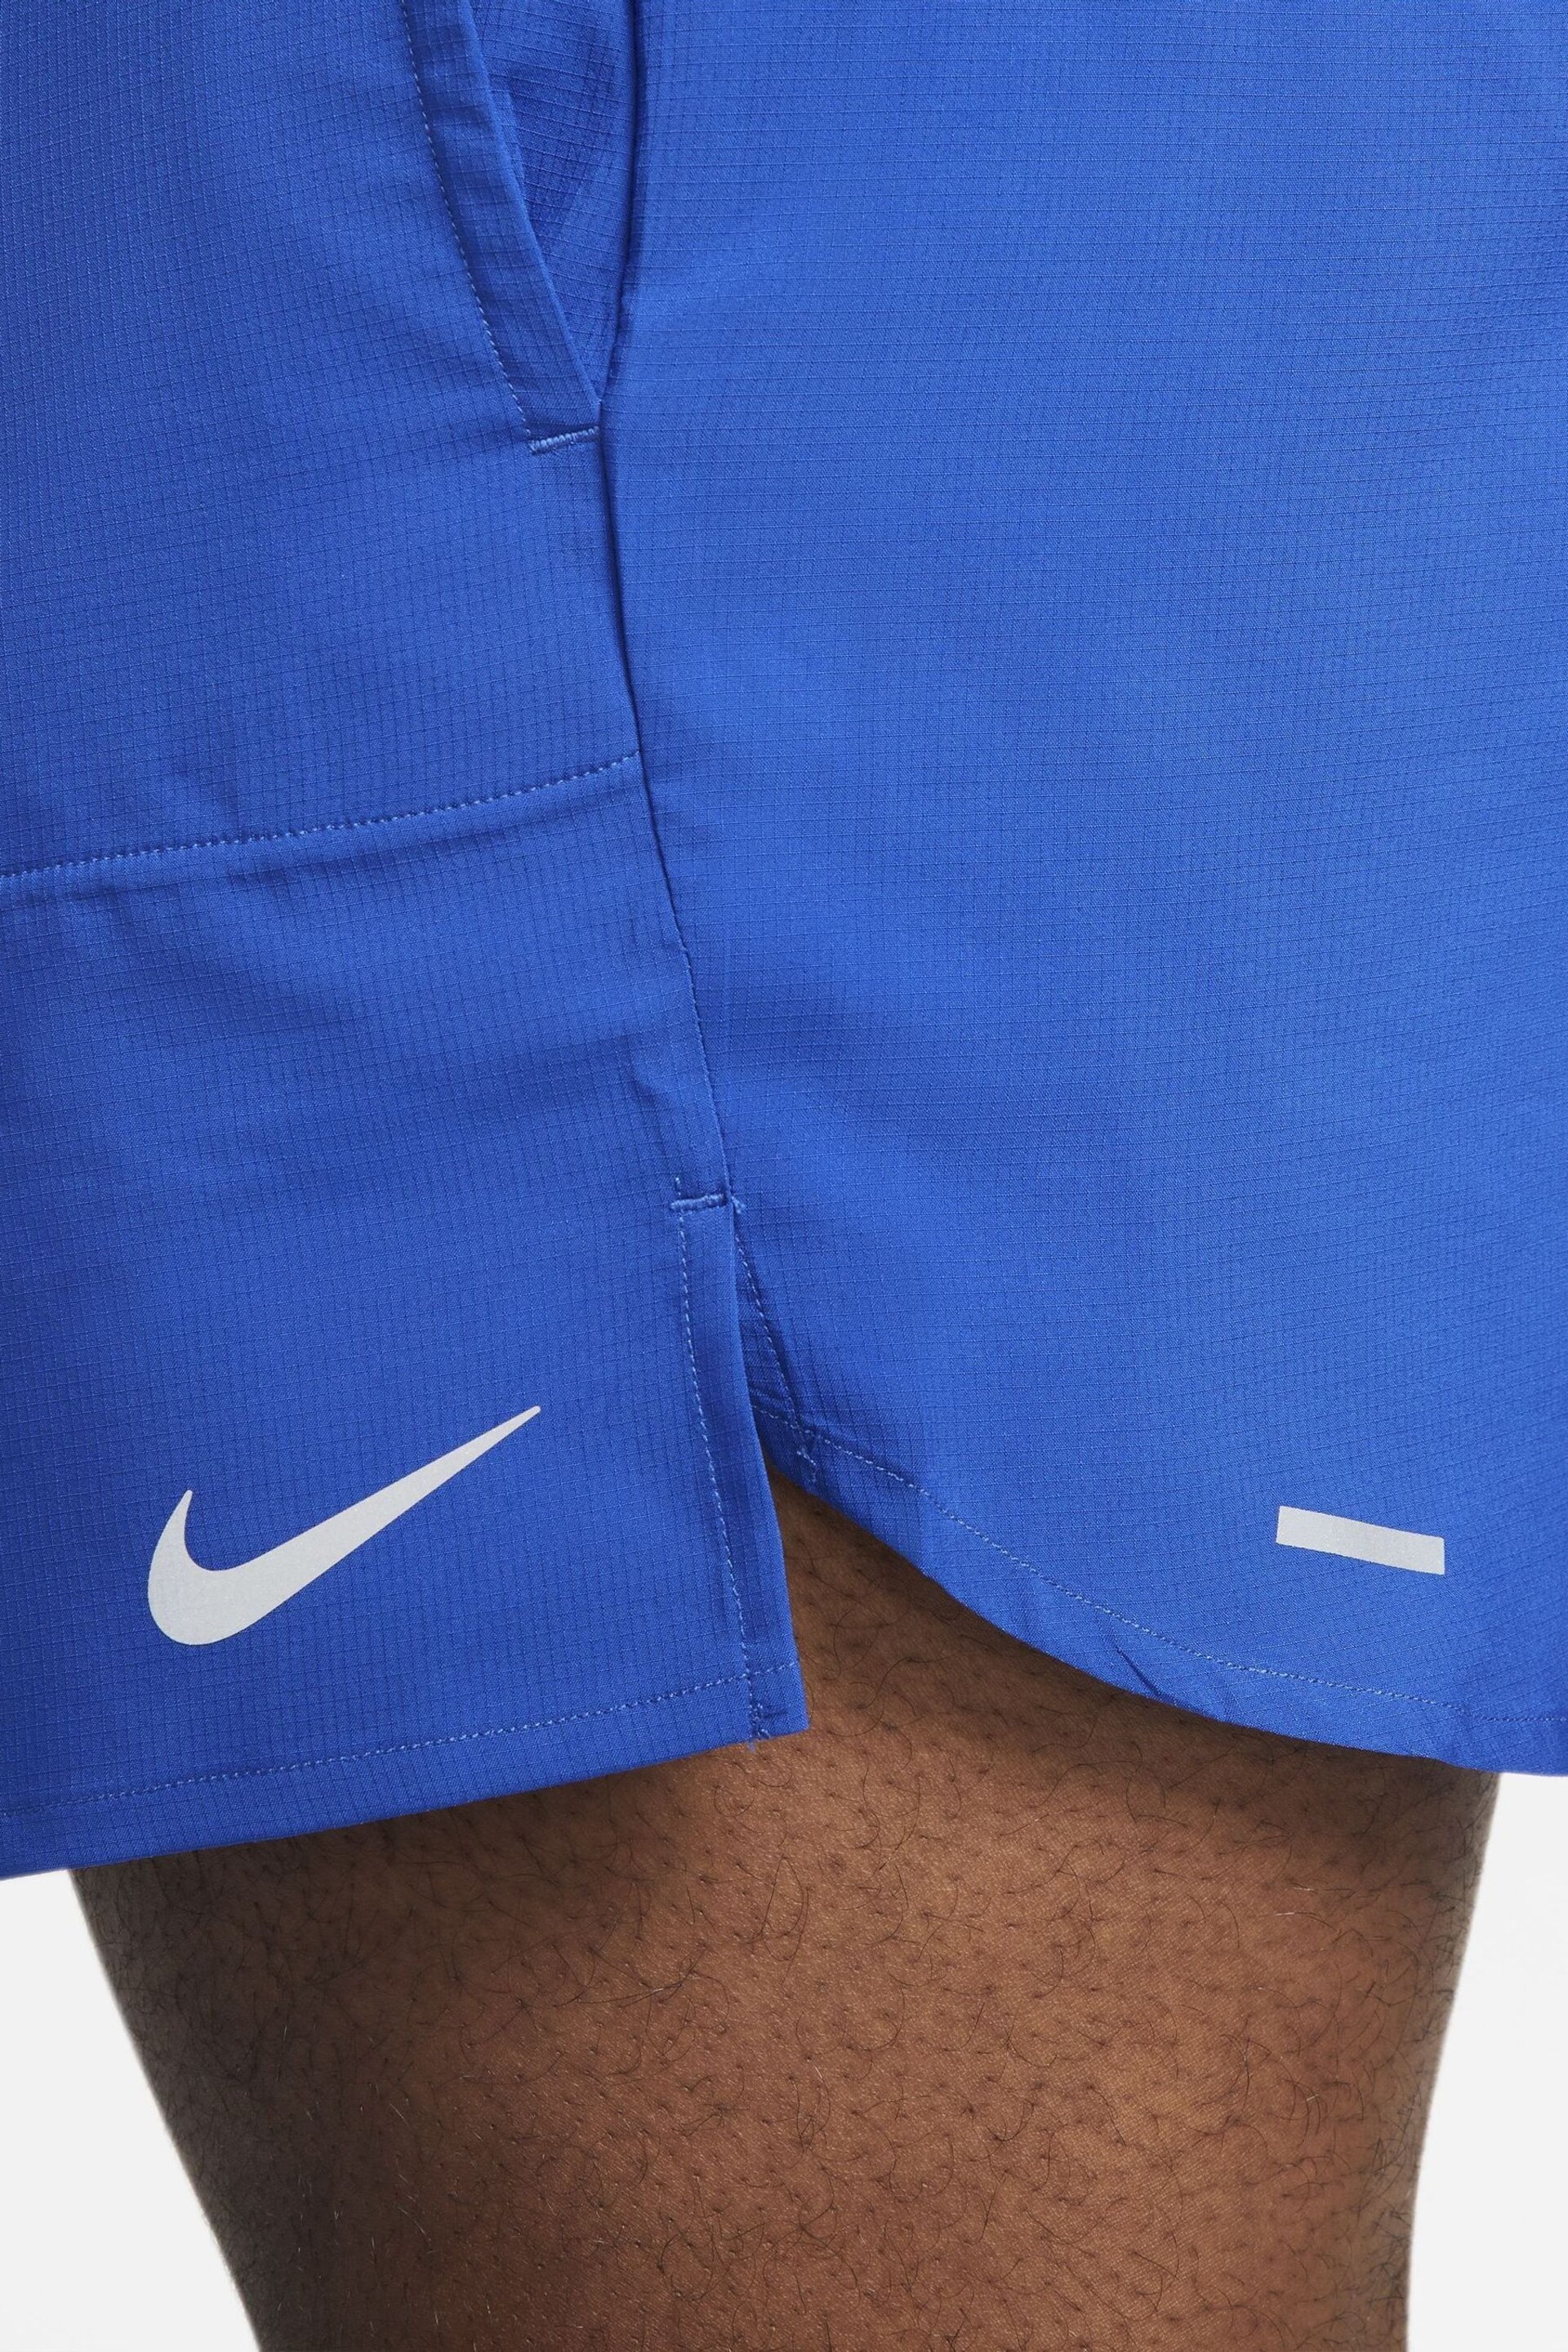 Nike Blue Dri-FIT Stride 5 Inch Running Shorts - Image 12 of 16